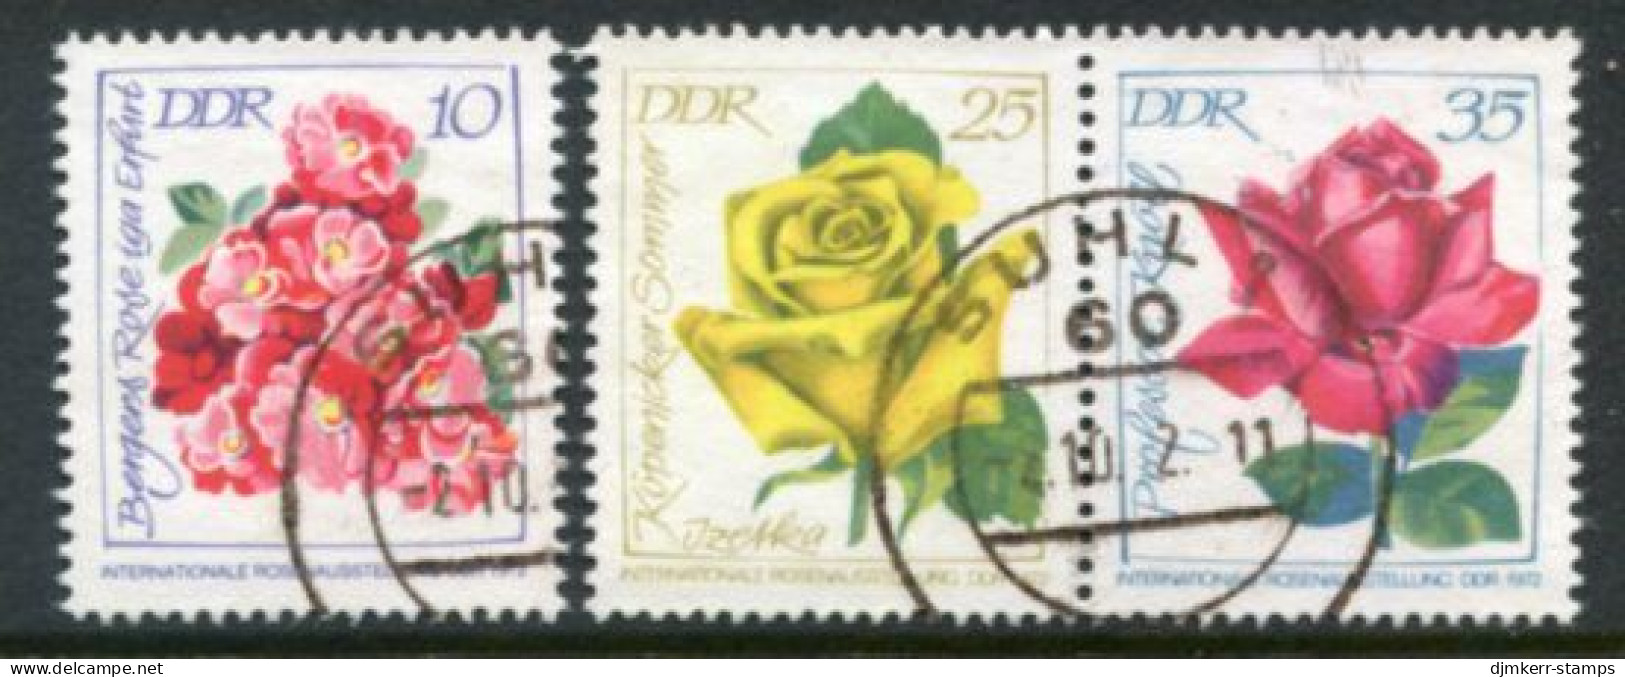 DDR / E. GERMANY 1972 Rose Exhibition II Used*.  Michel 1778-80 - Used Stamps